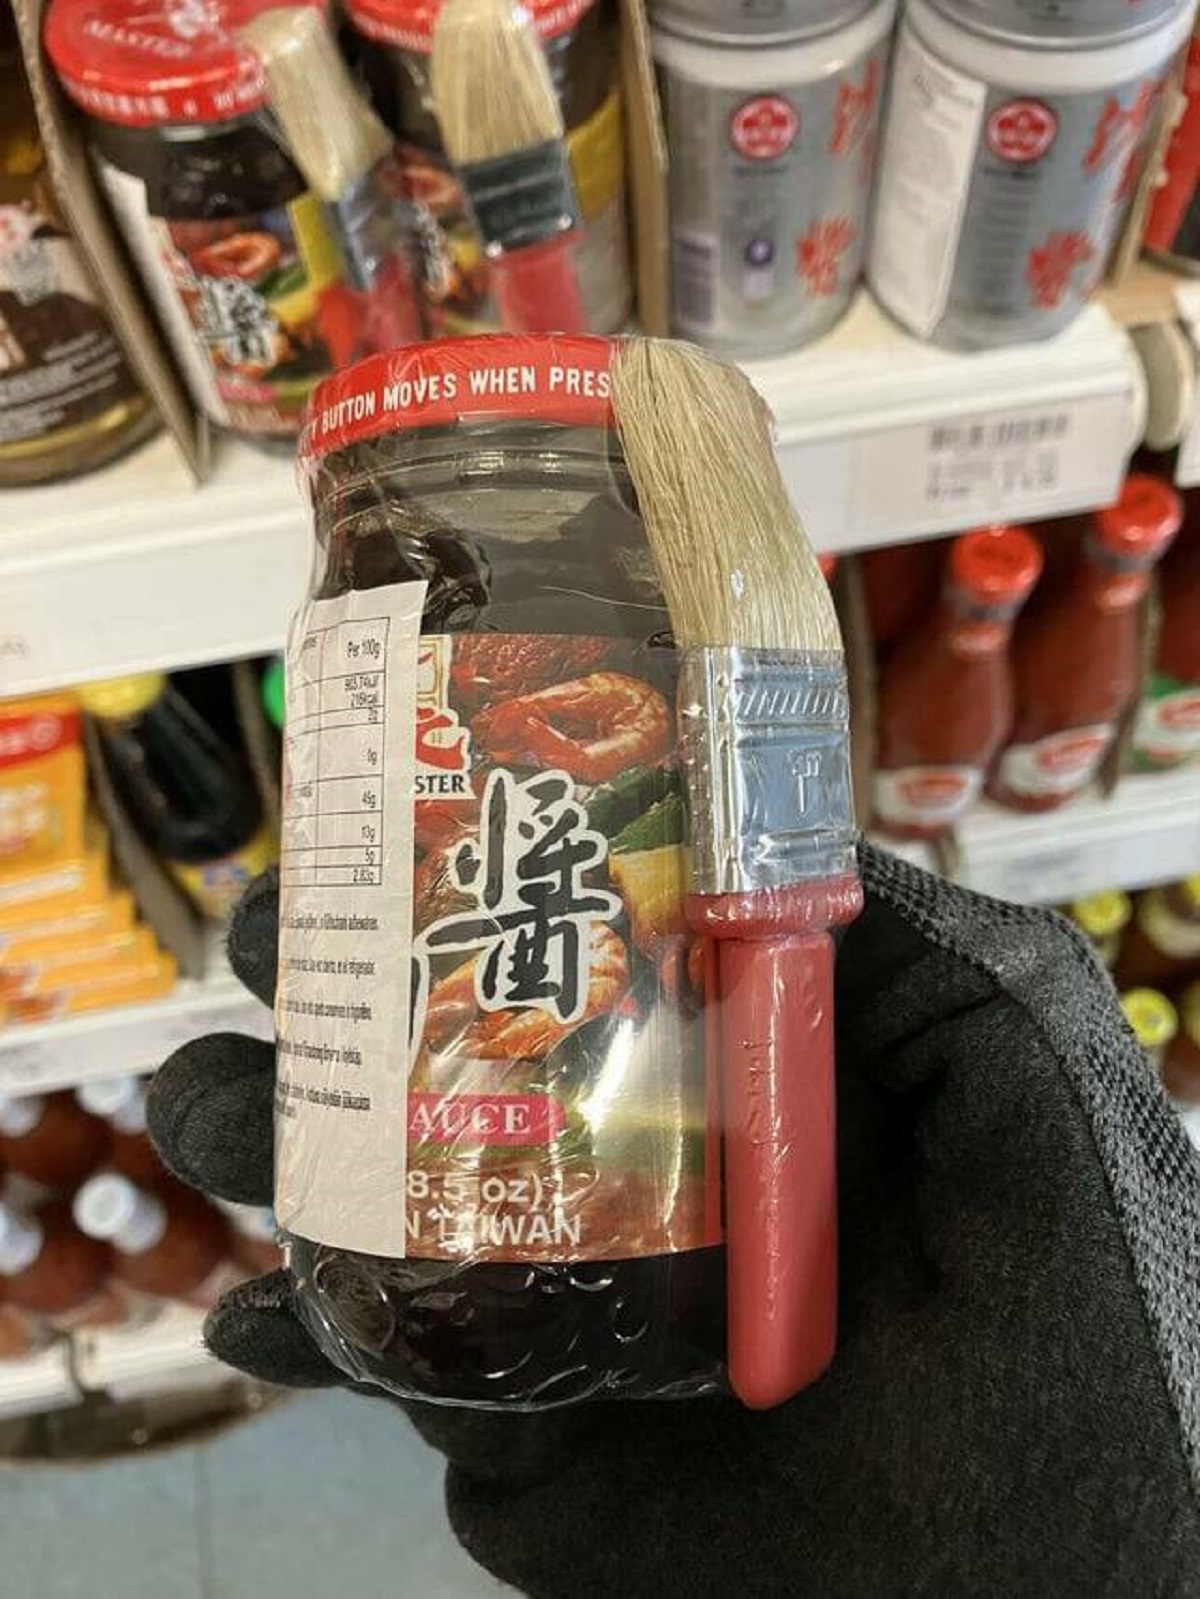 "This BBQ sauce comes with a brush"